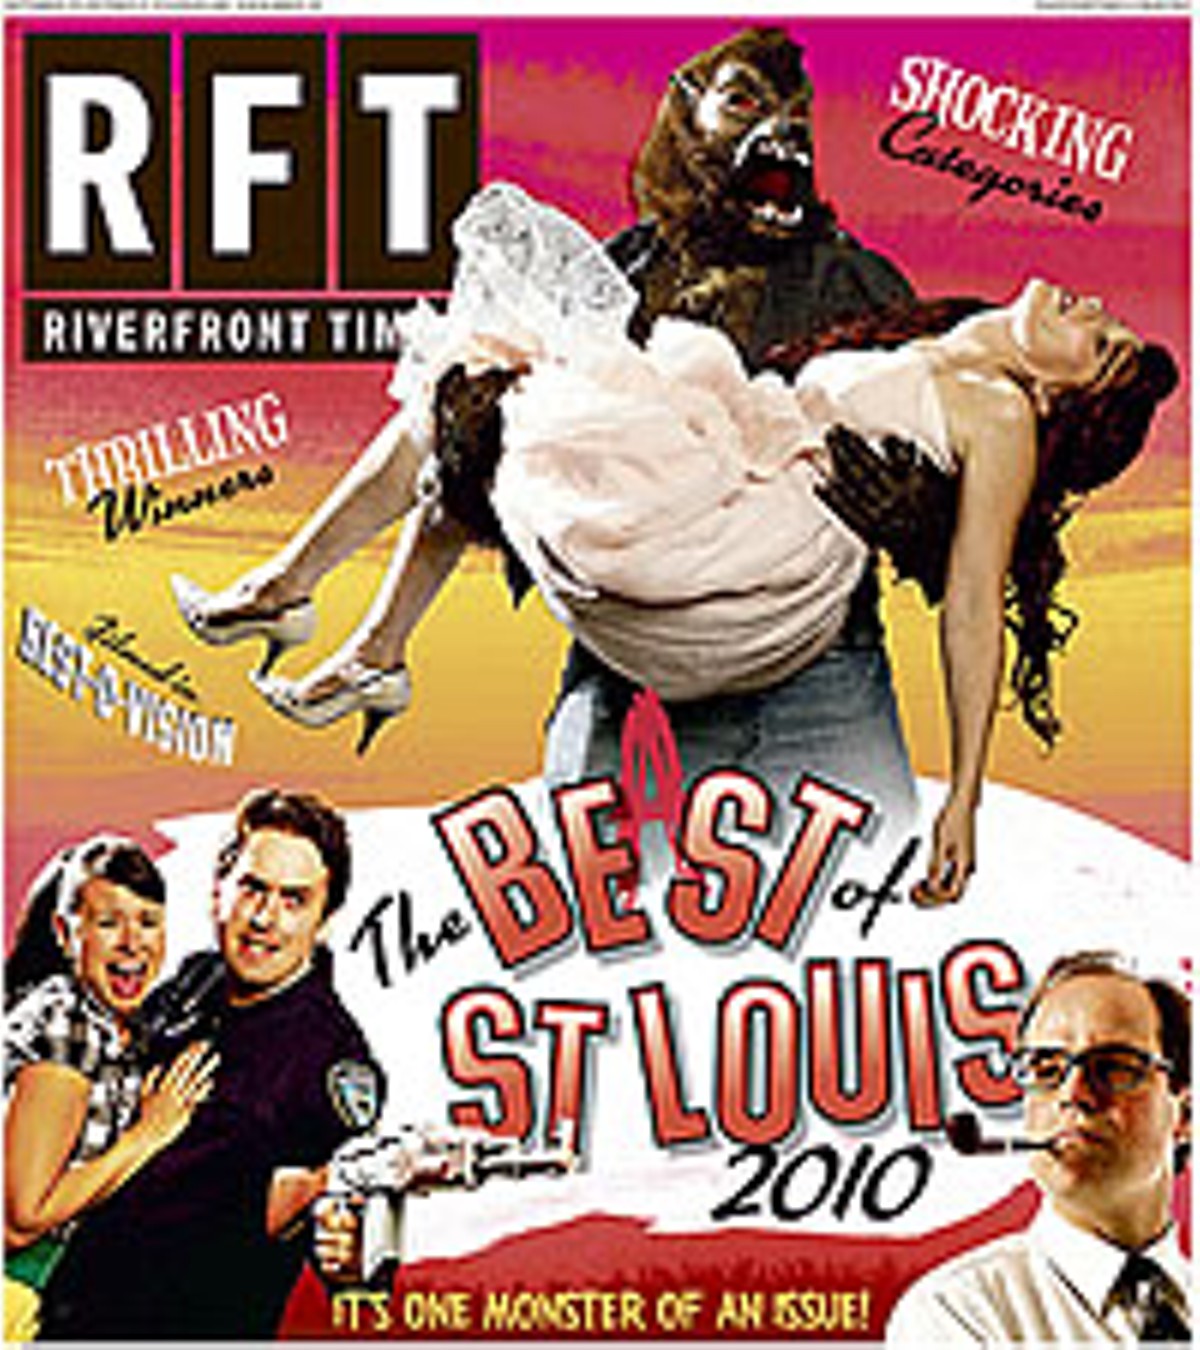 Best of St. Louis 2010 Issue Cover